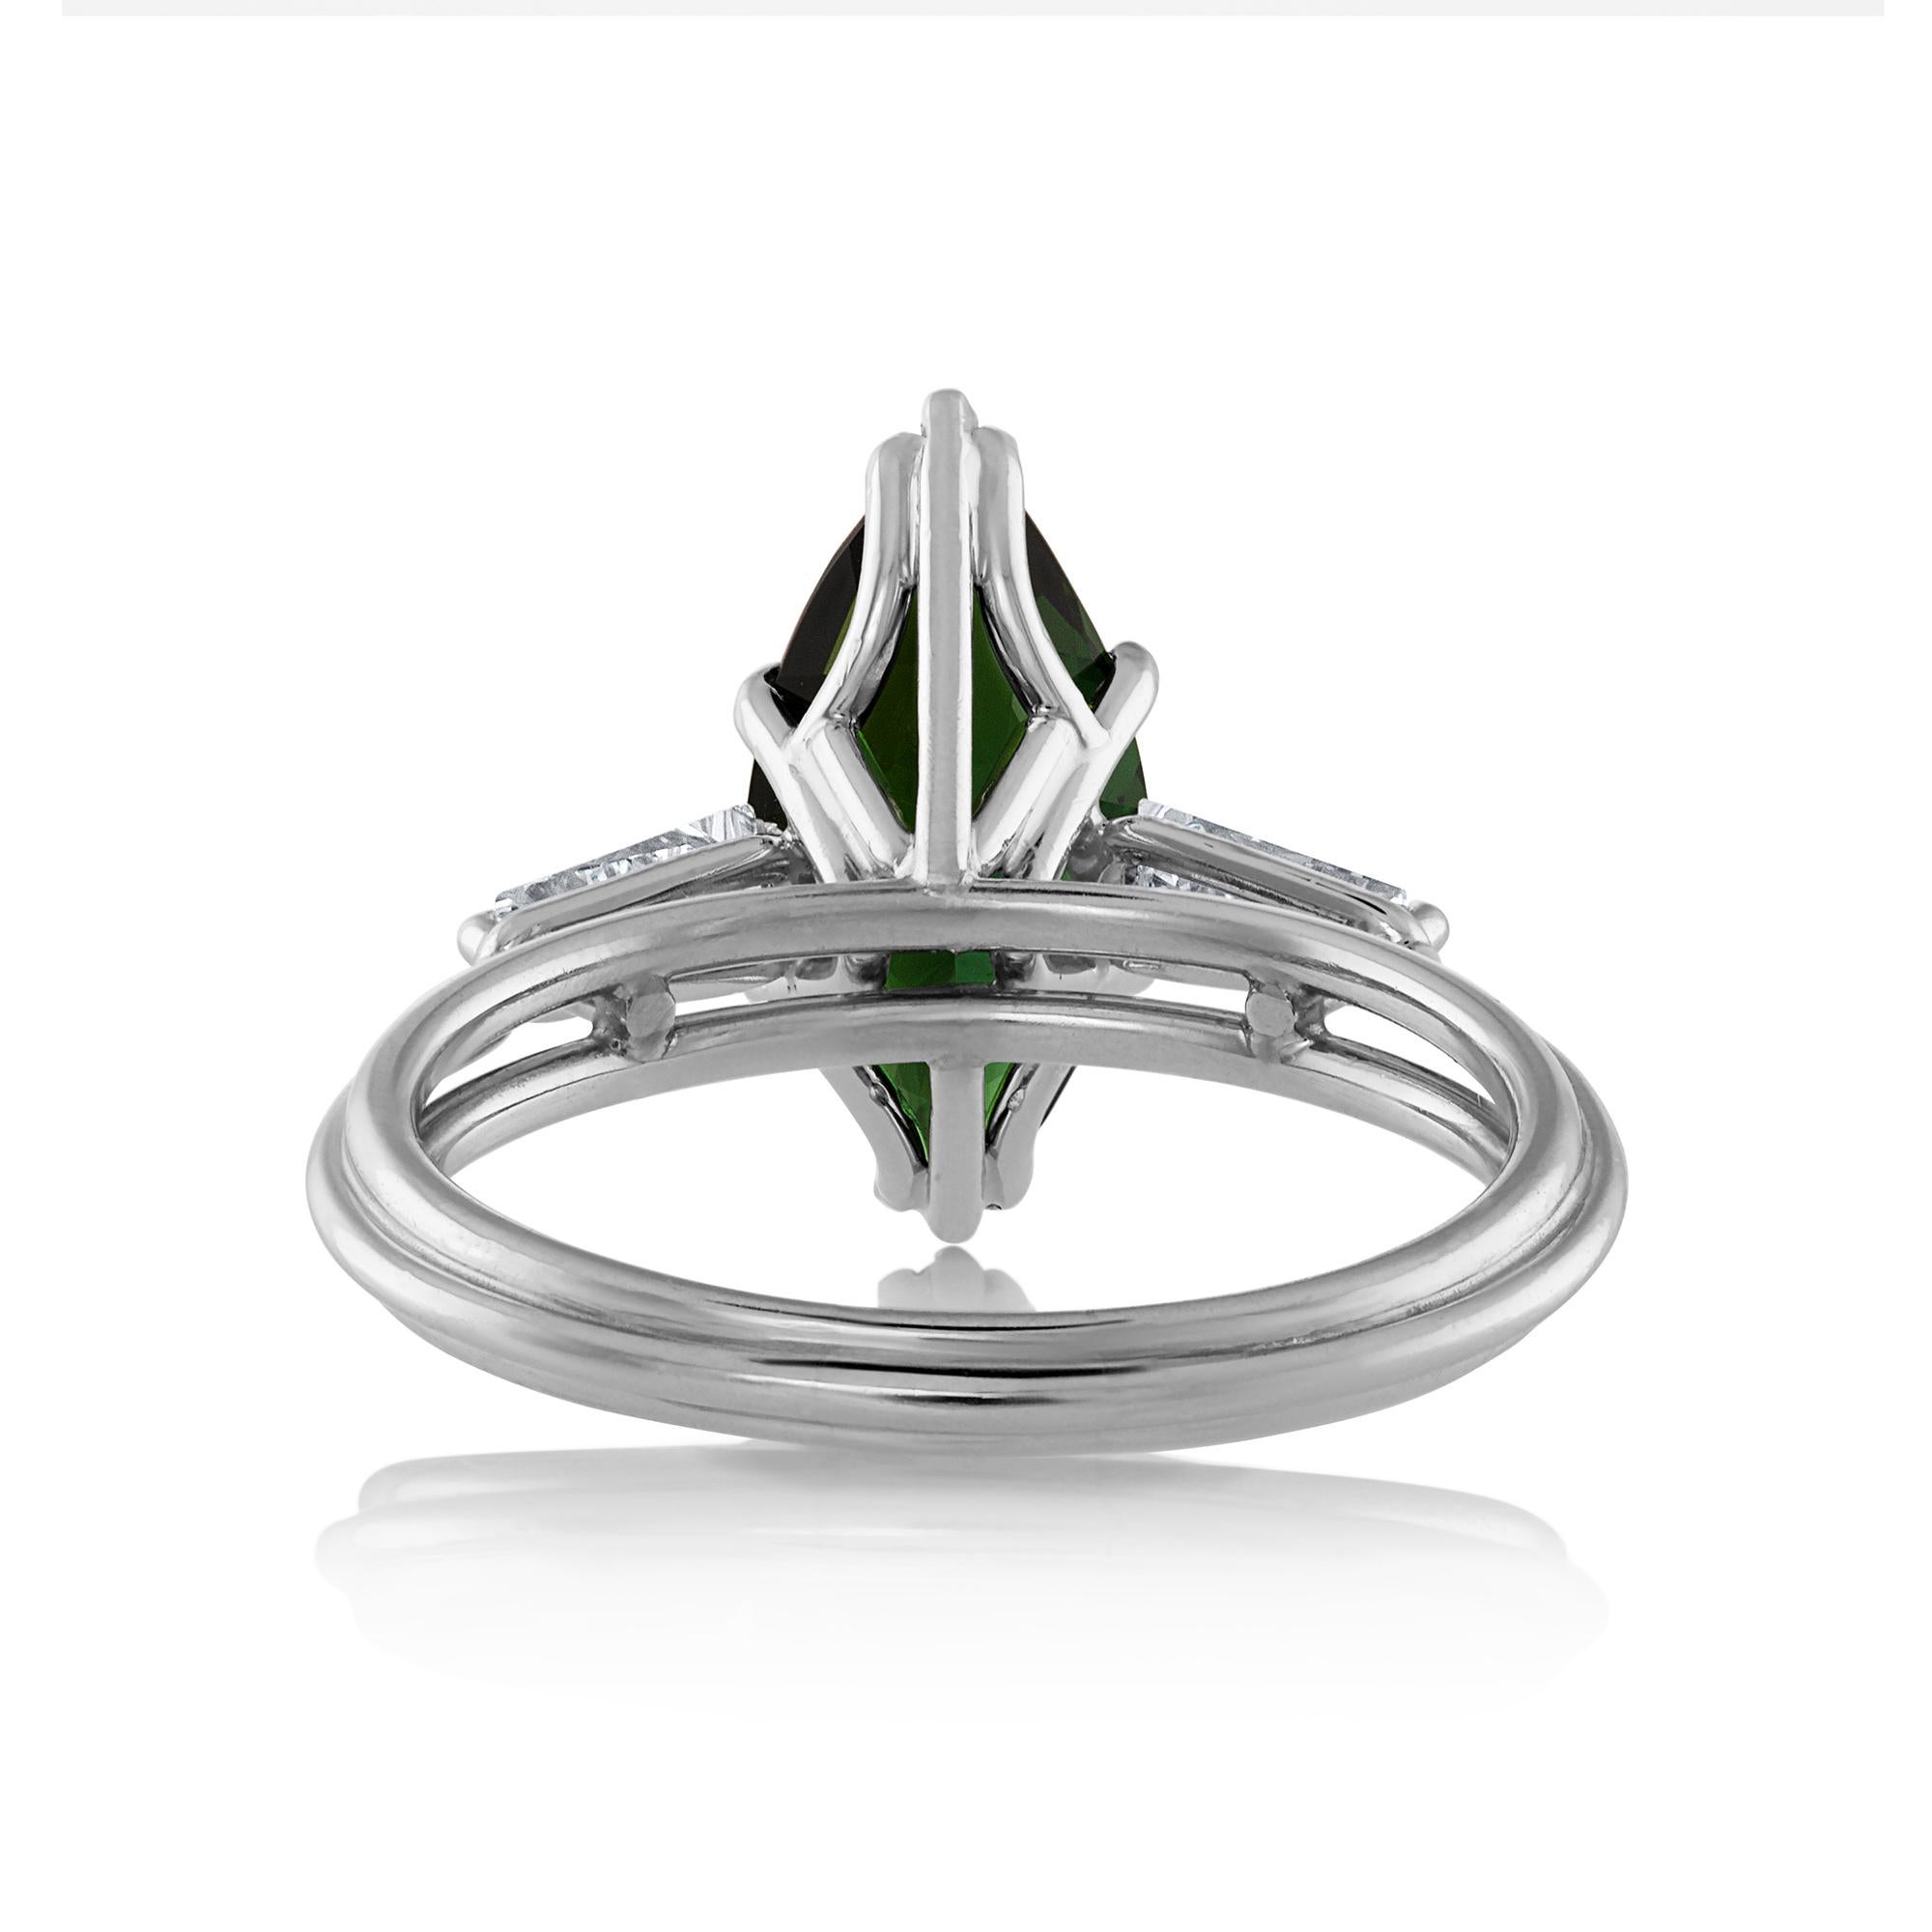 Art Deco GIA 3.24Carat Green Tourmaline Diamond Engagement Wedding Platinum Ring In Good Condition For Sale In New York, NY